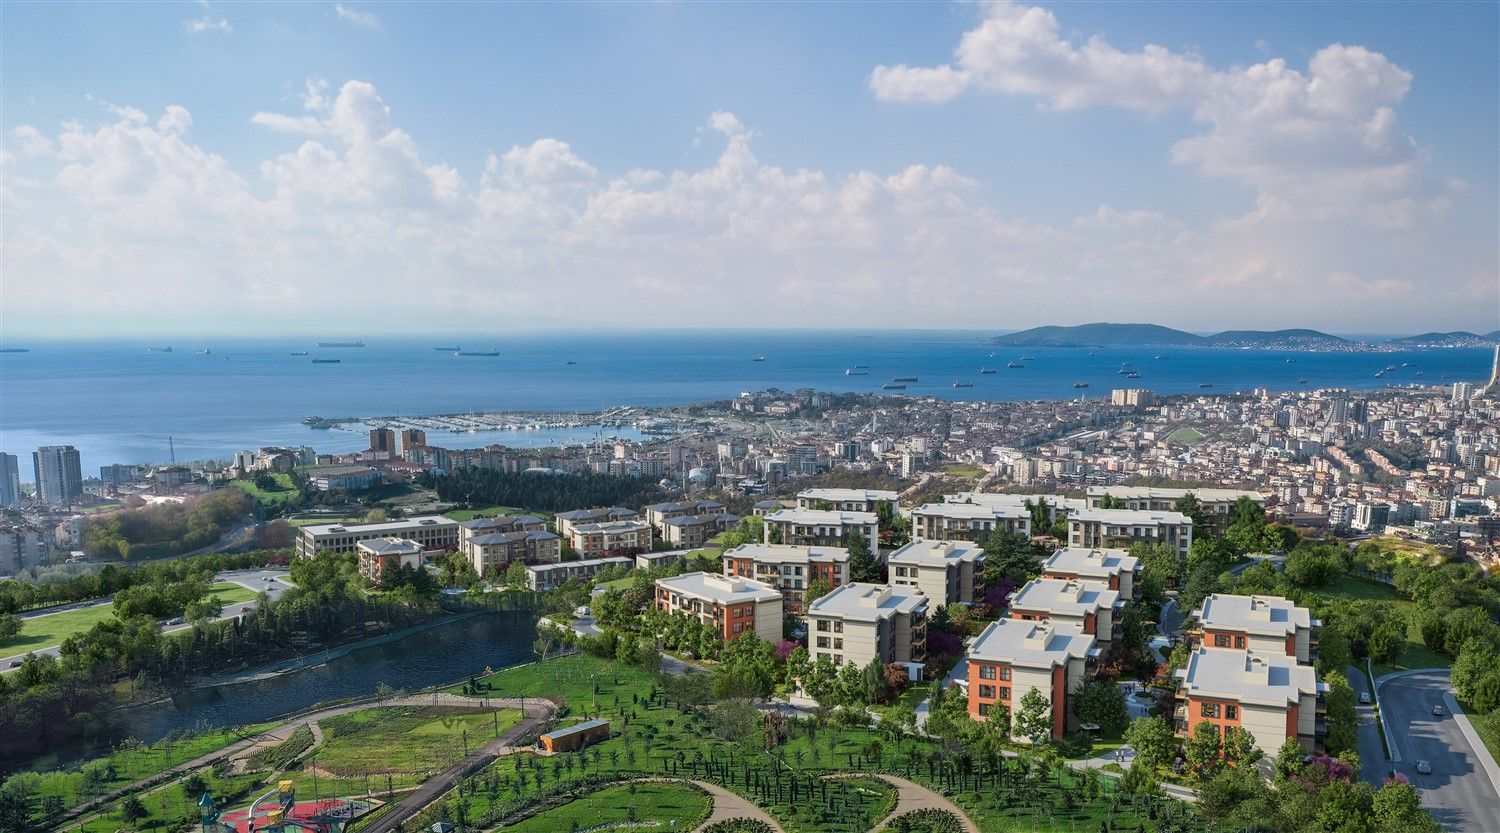 Large-scale project in an excellent location on the Black Sea coast